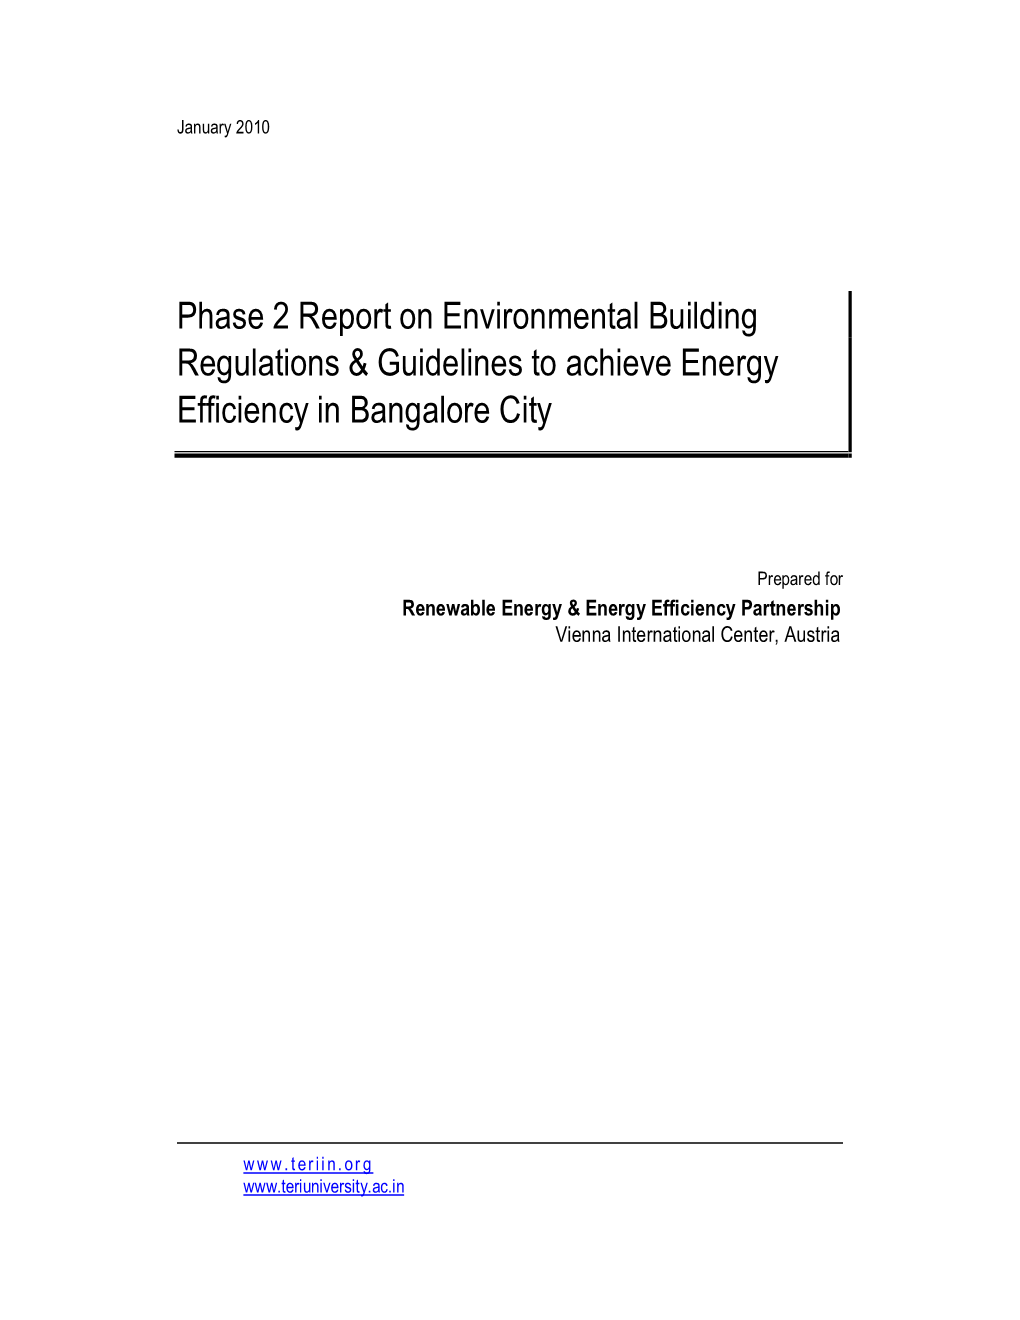 Phase 2 Report on Environmental Building Regulations & Guidelines